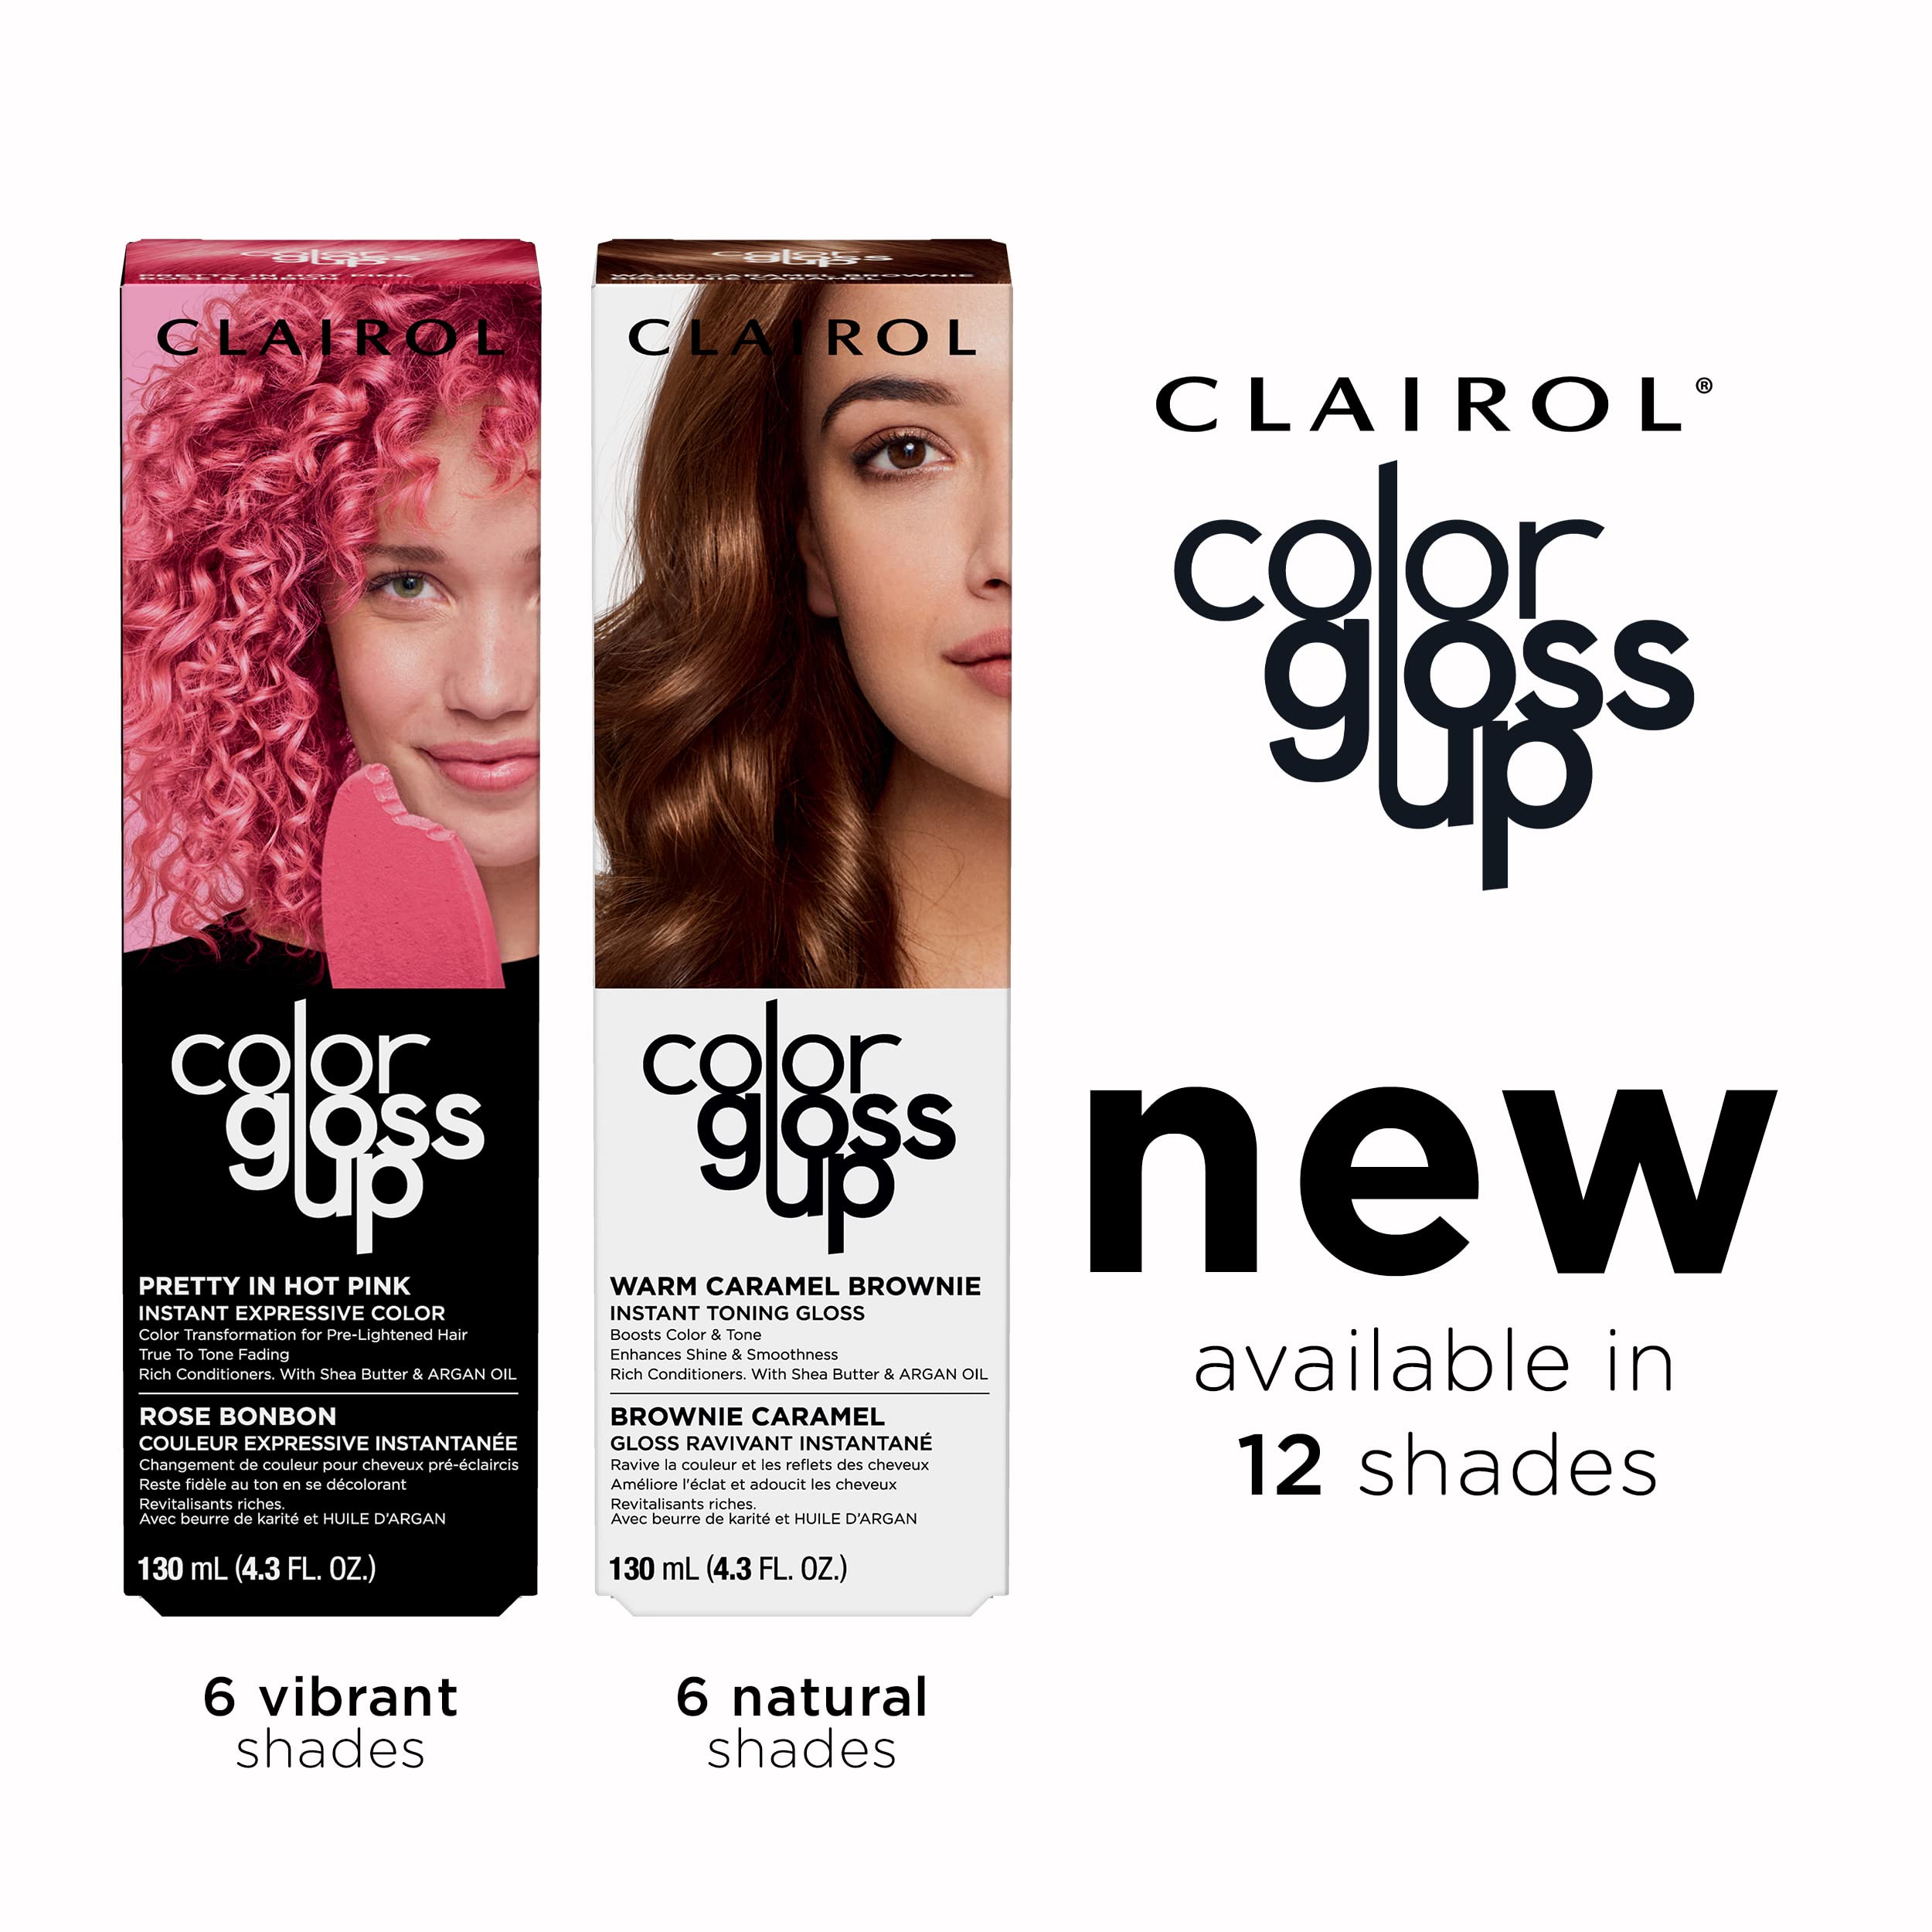 Clairol Color Gloss Up Temporary Hair Dye, Blazing Red Hair Color, Pack of 1